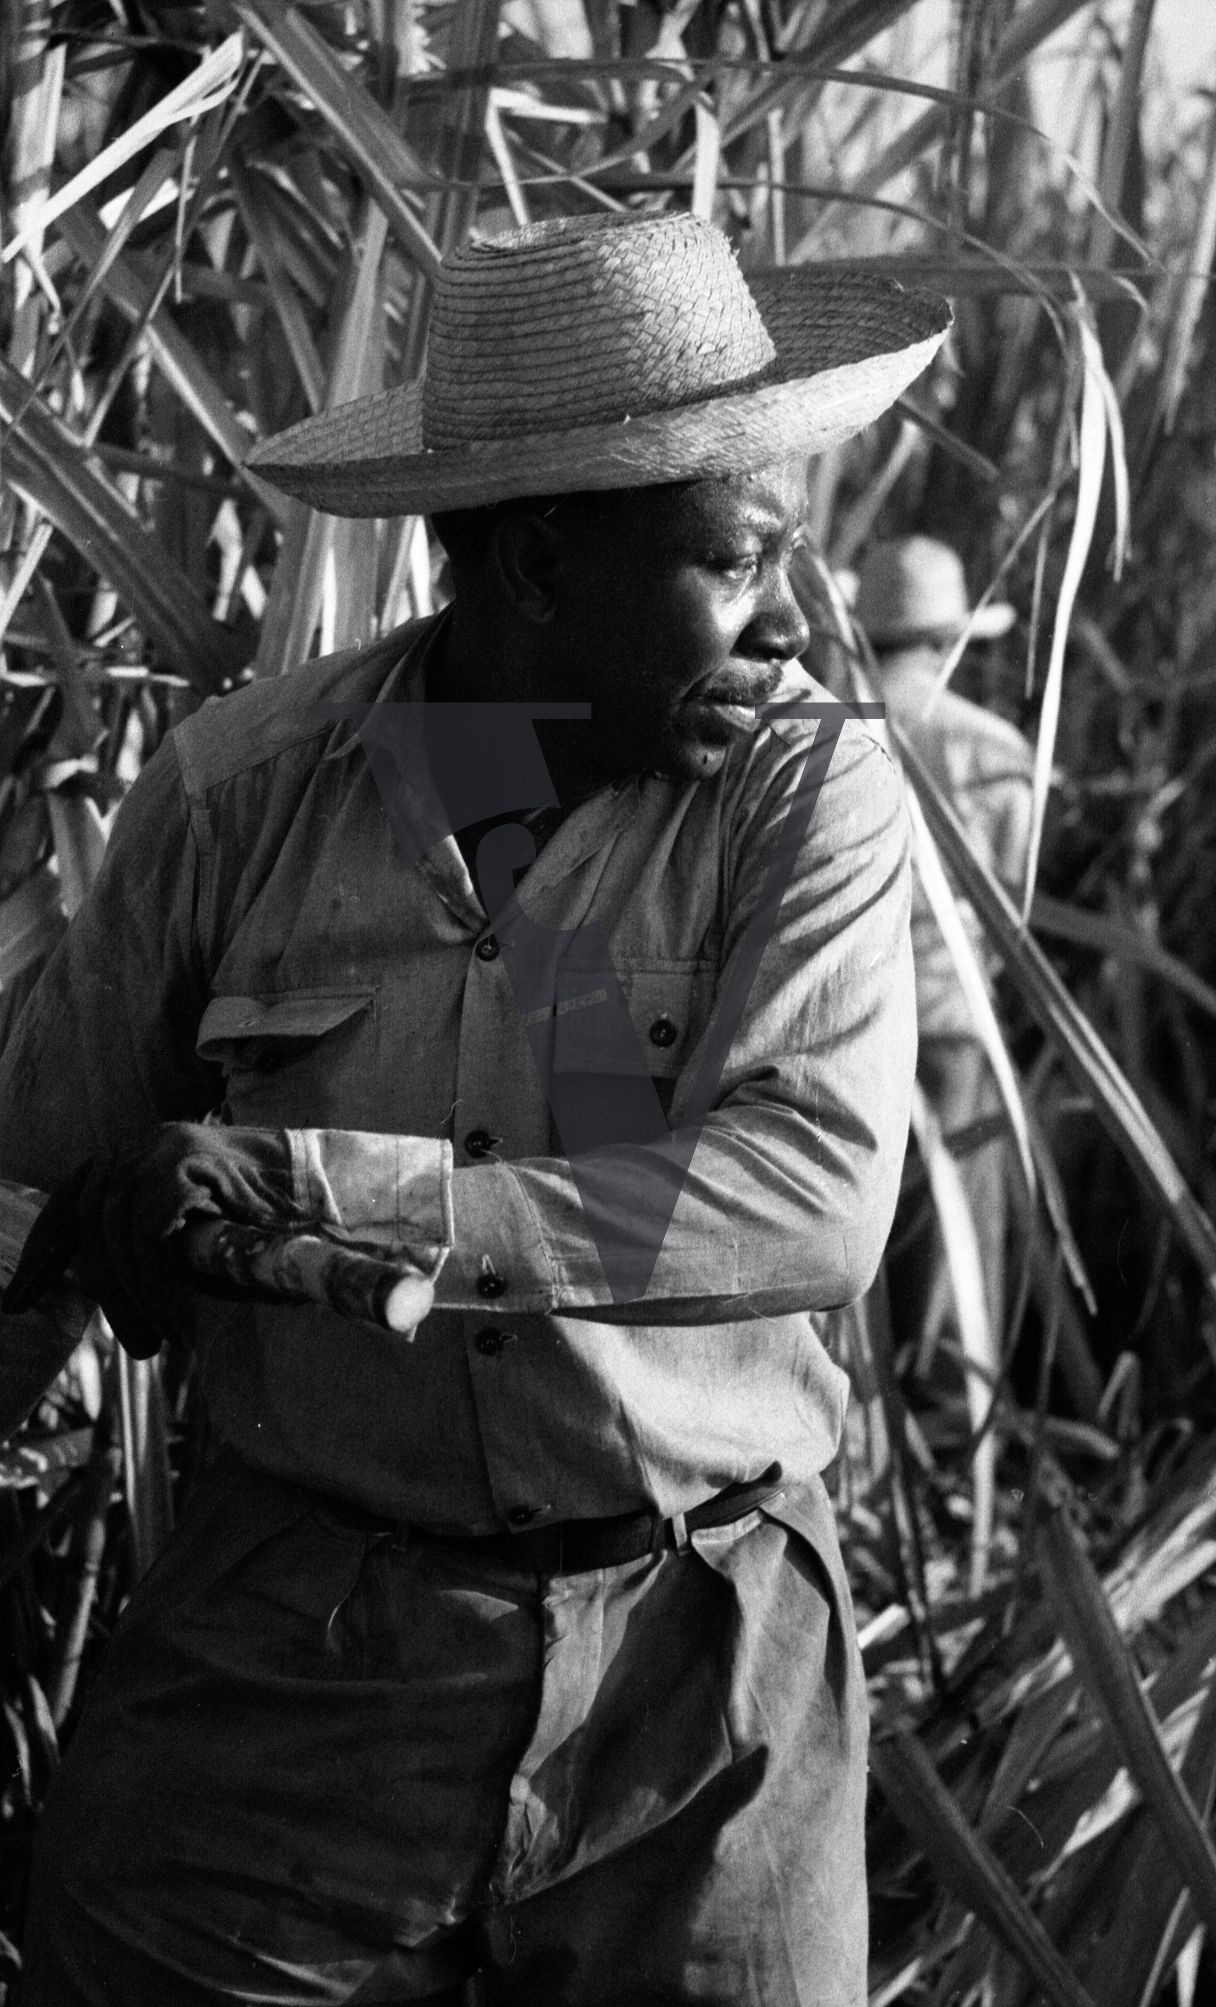 Cuba, Cane cutting, man in hat working with scythe.